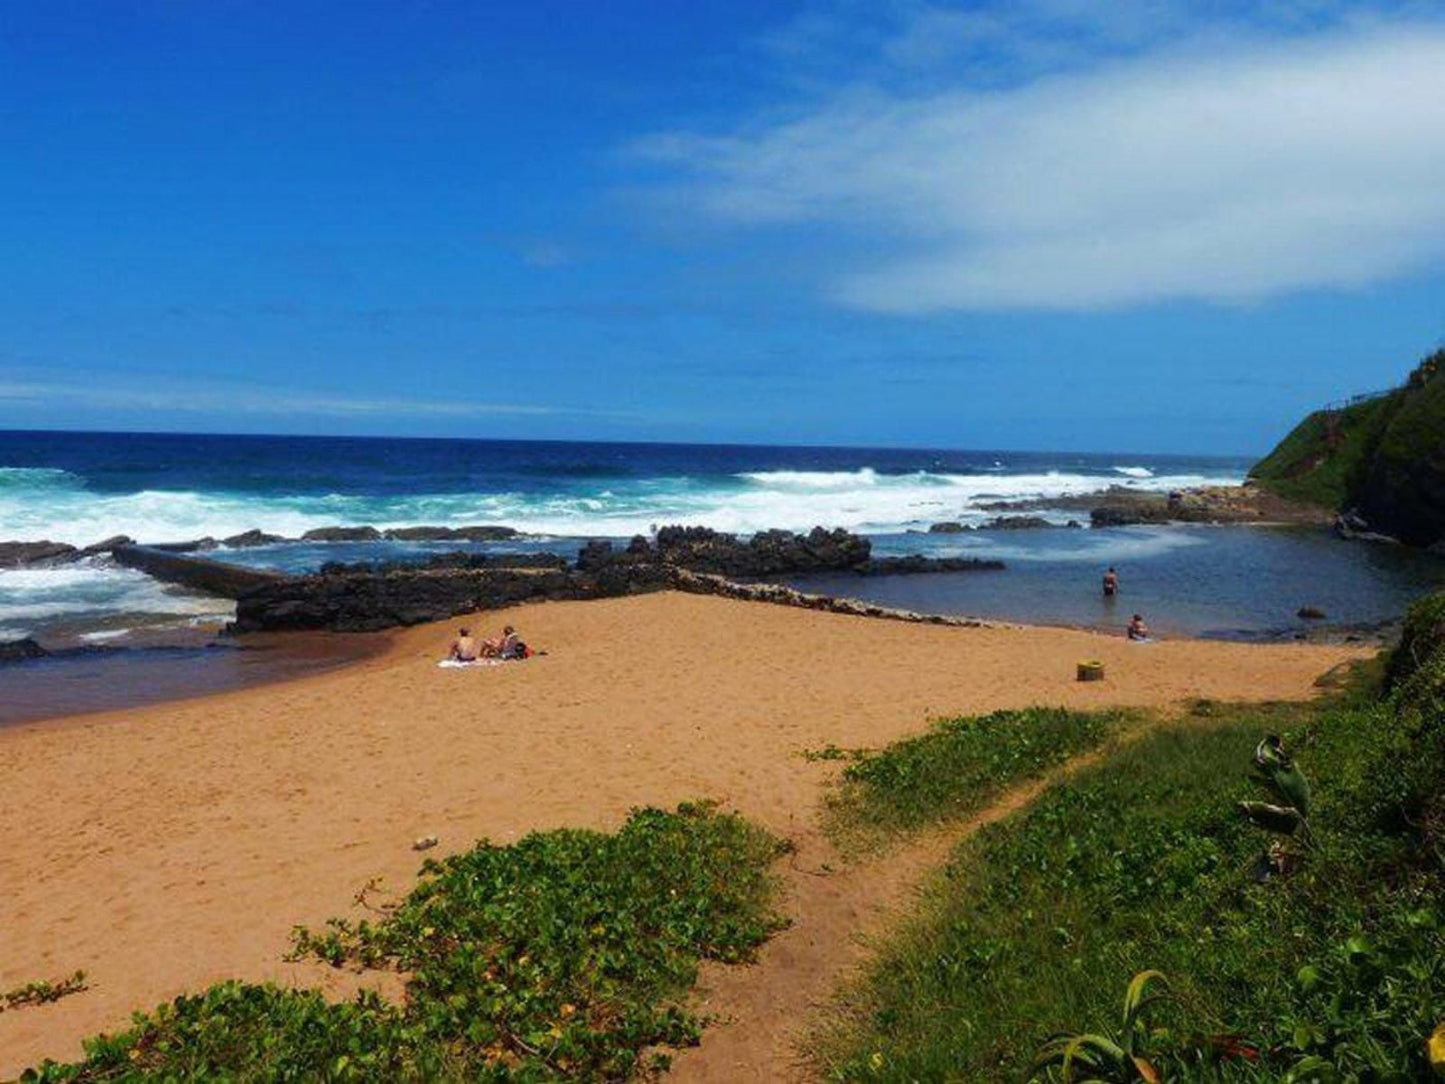 The Fairways Salt Rock Ballito Kwazulu Natal South Africa Complementary Colors, Colorful, Beach, Nature, Sand, Ocean, Waters